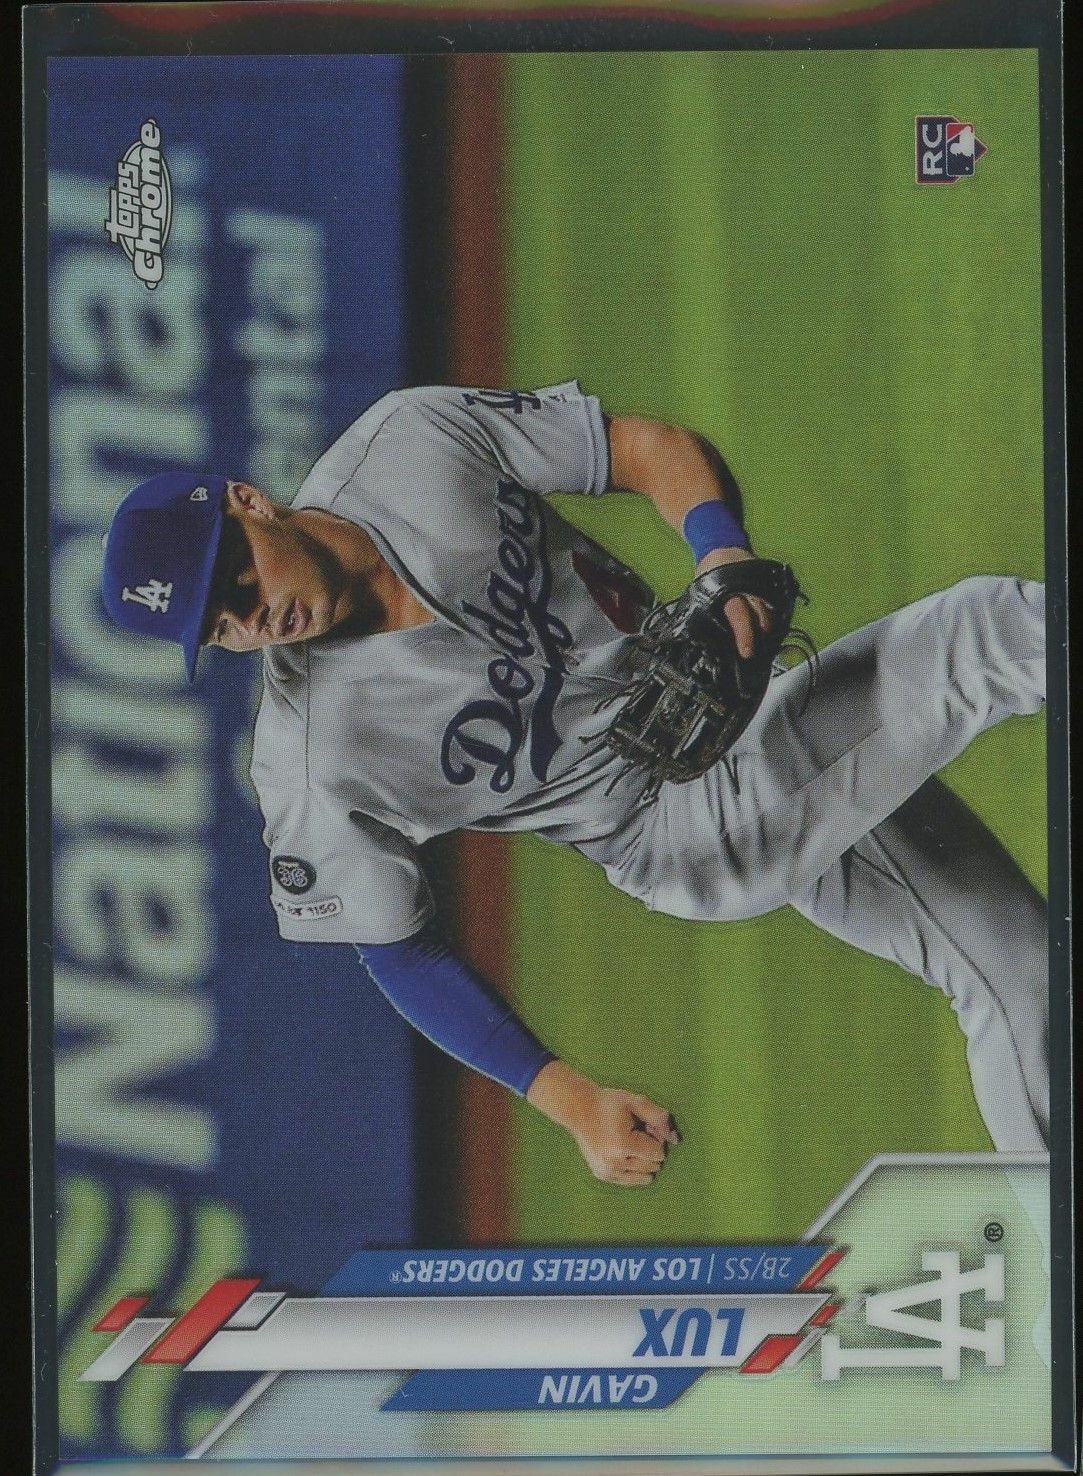 Gavin Lux 2020 Topps Chrome Image Variation Refractor SP RC ROOKIE #148 DODGERS